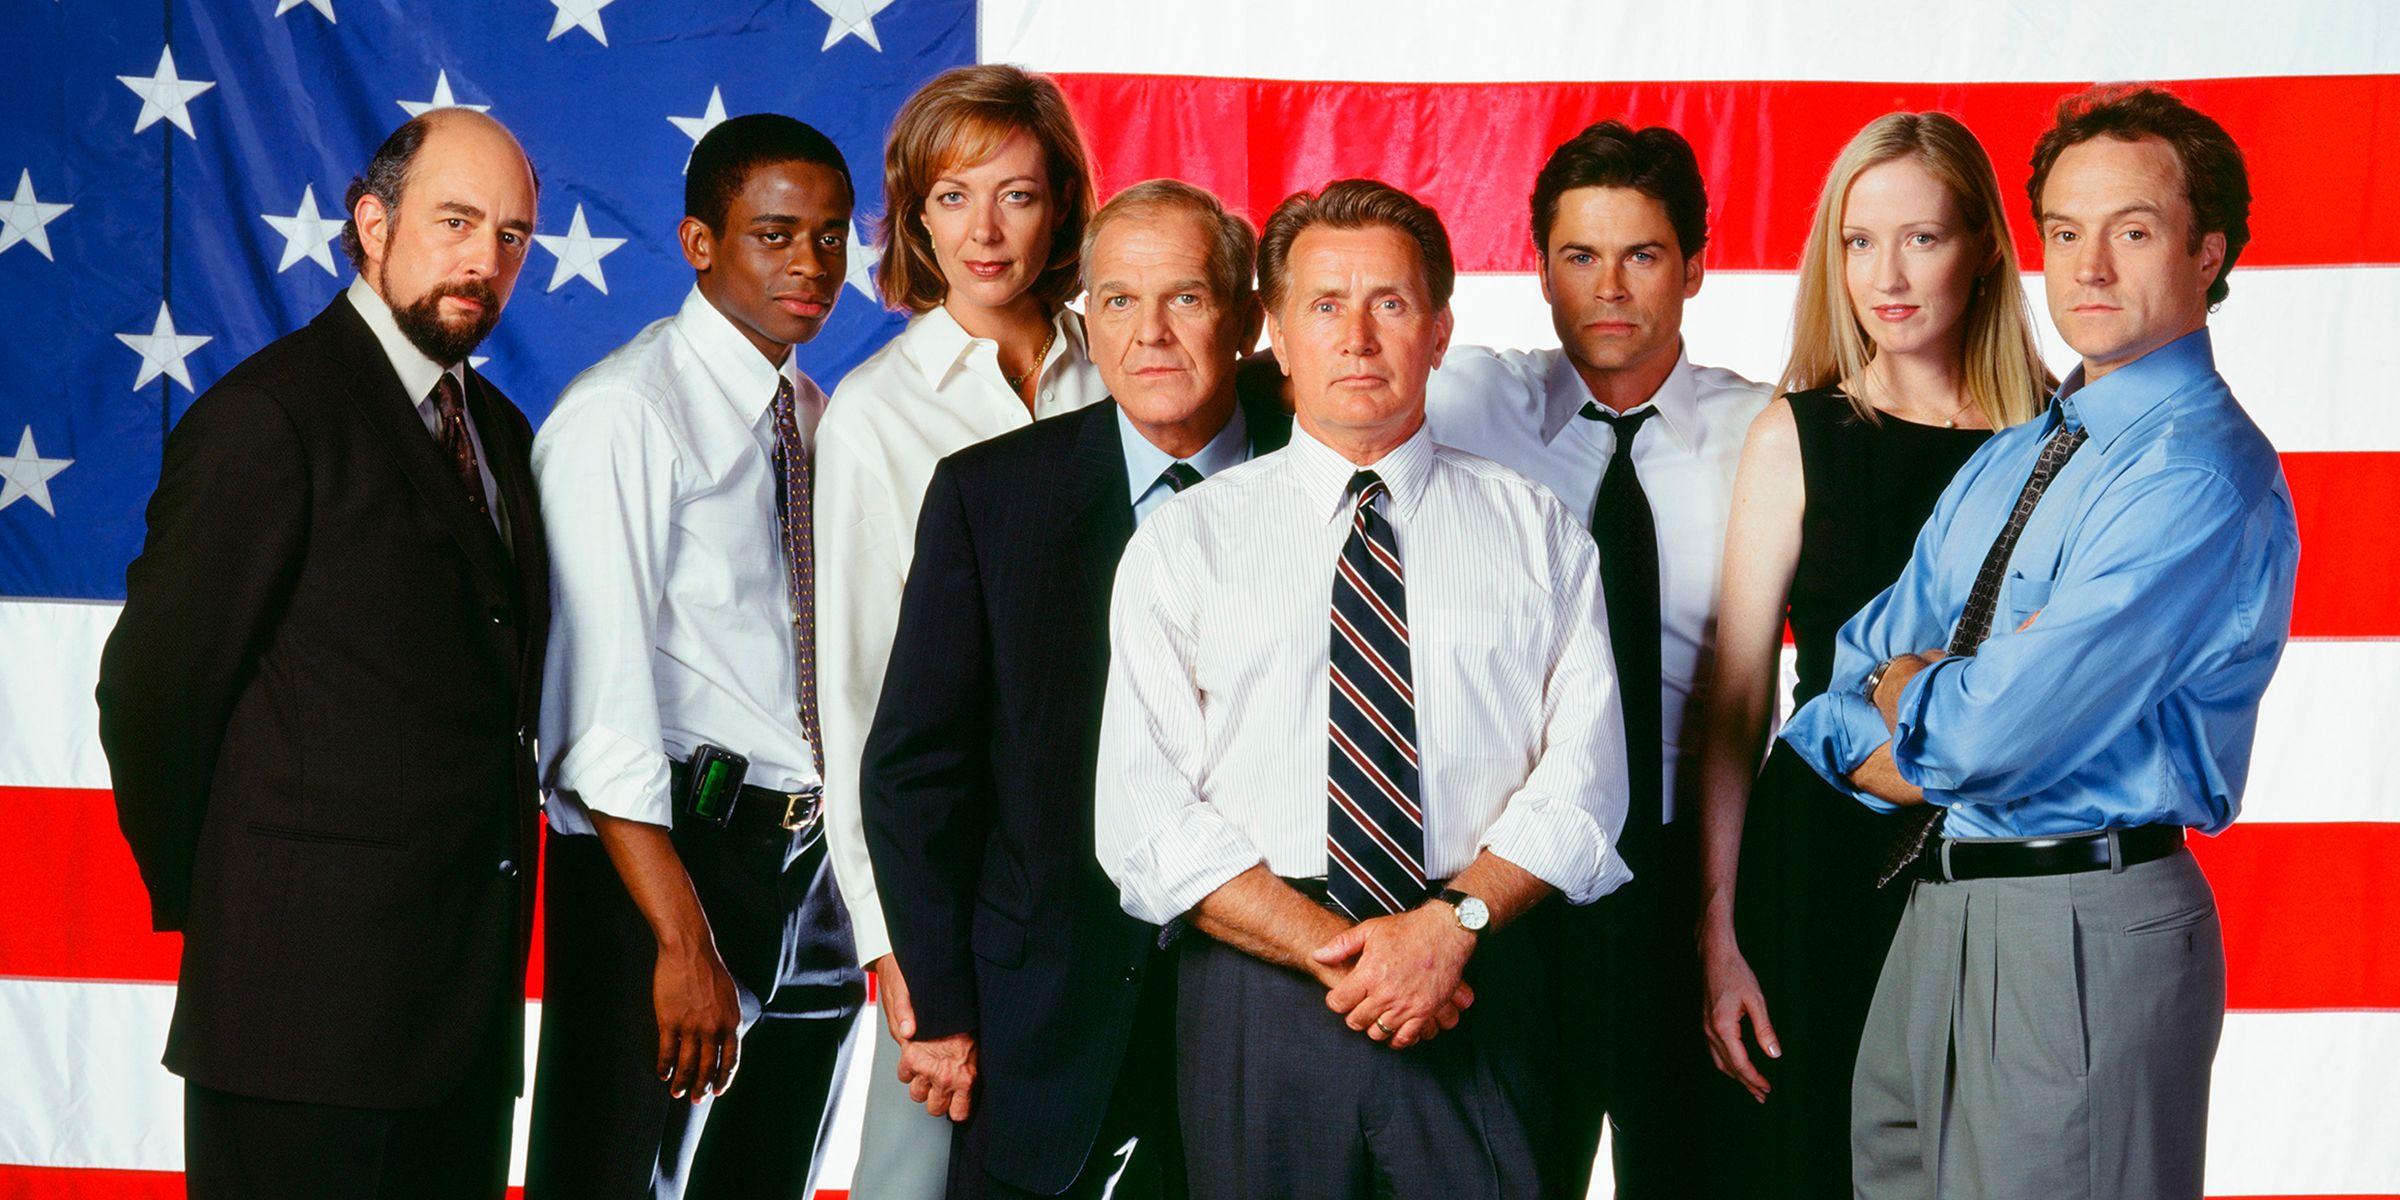 The West Wing Cast in front of an American flag.